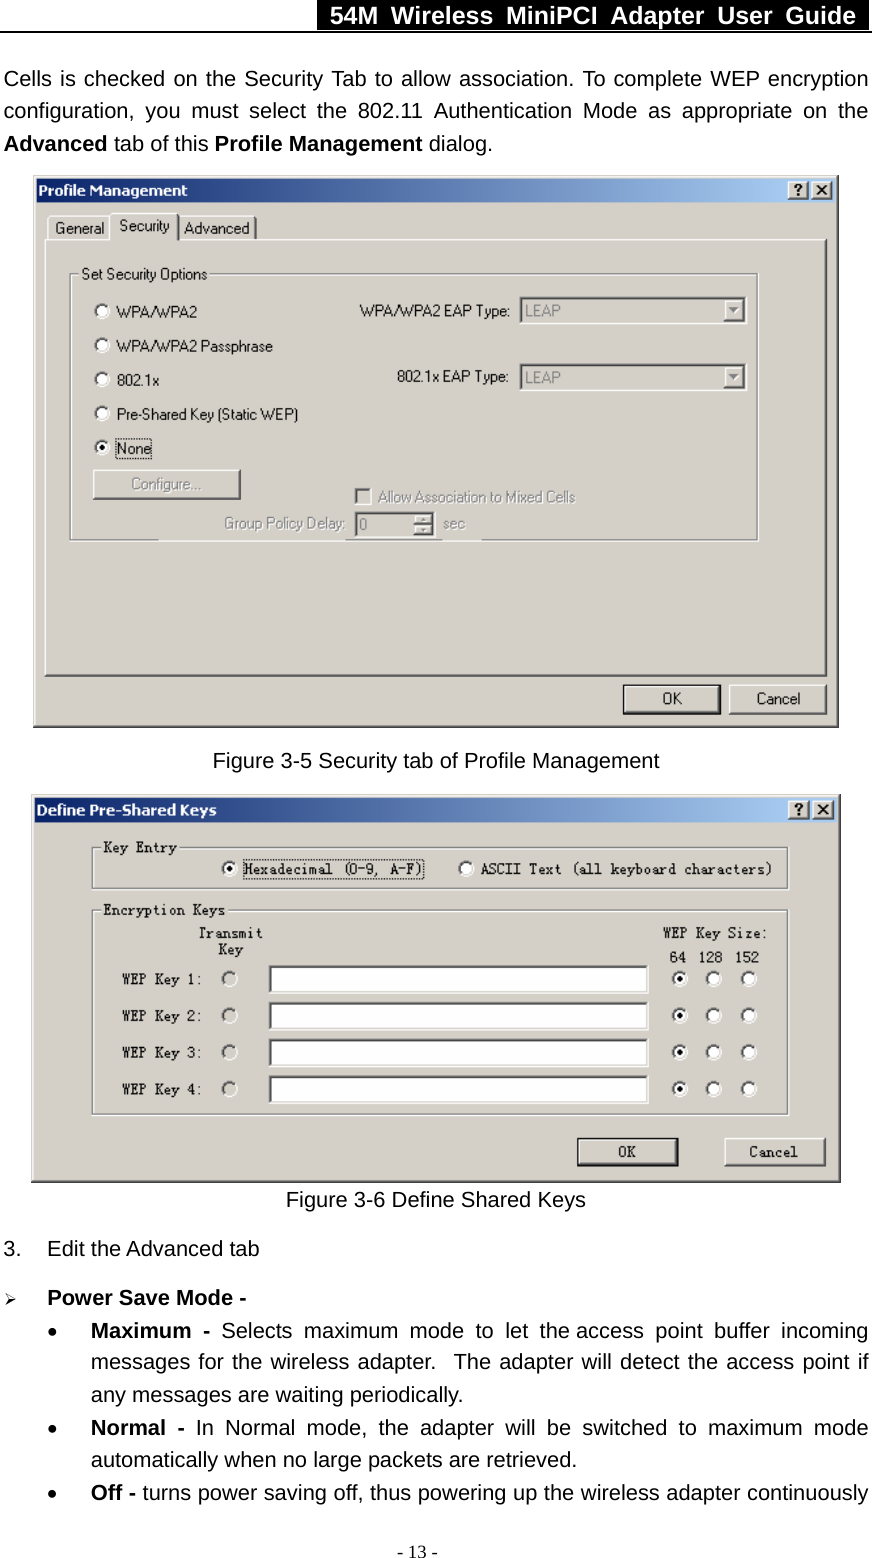   54M Wireless MiniPCI Adapter User Guide  - 13 - Cells is checked on the Security Tab to allow association. To complete WEP encryption configuration, you must select the 802.11 Authentication Mode as appropriate on the Advanced tab of this Profile Management dialog.  Figure 3-5 Security tab of Profile Management  Figure 3-6 Define Shared Keys 3.  Edit the Advanced tab ¾ Power Save Mode - • Maximum - Selects maximum mode to let the access point buffer incoming messages for the wireless adapter.  The adapter will detect the access point if any messages are waiting periodically. • Normal - In Normal mode, the adapter will be switched to maximum mode automatically when no large packets are retrieved. • Off - turns power saving off, thus powering up the wireless adapter continuously 